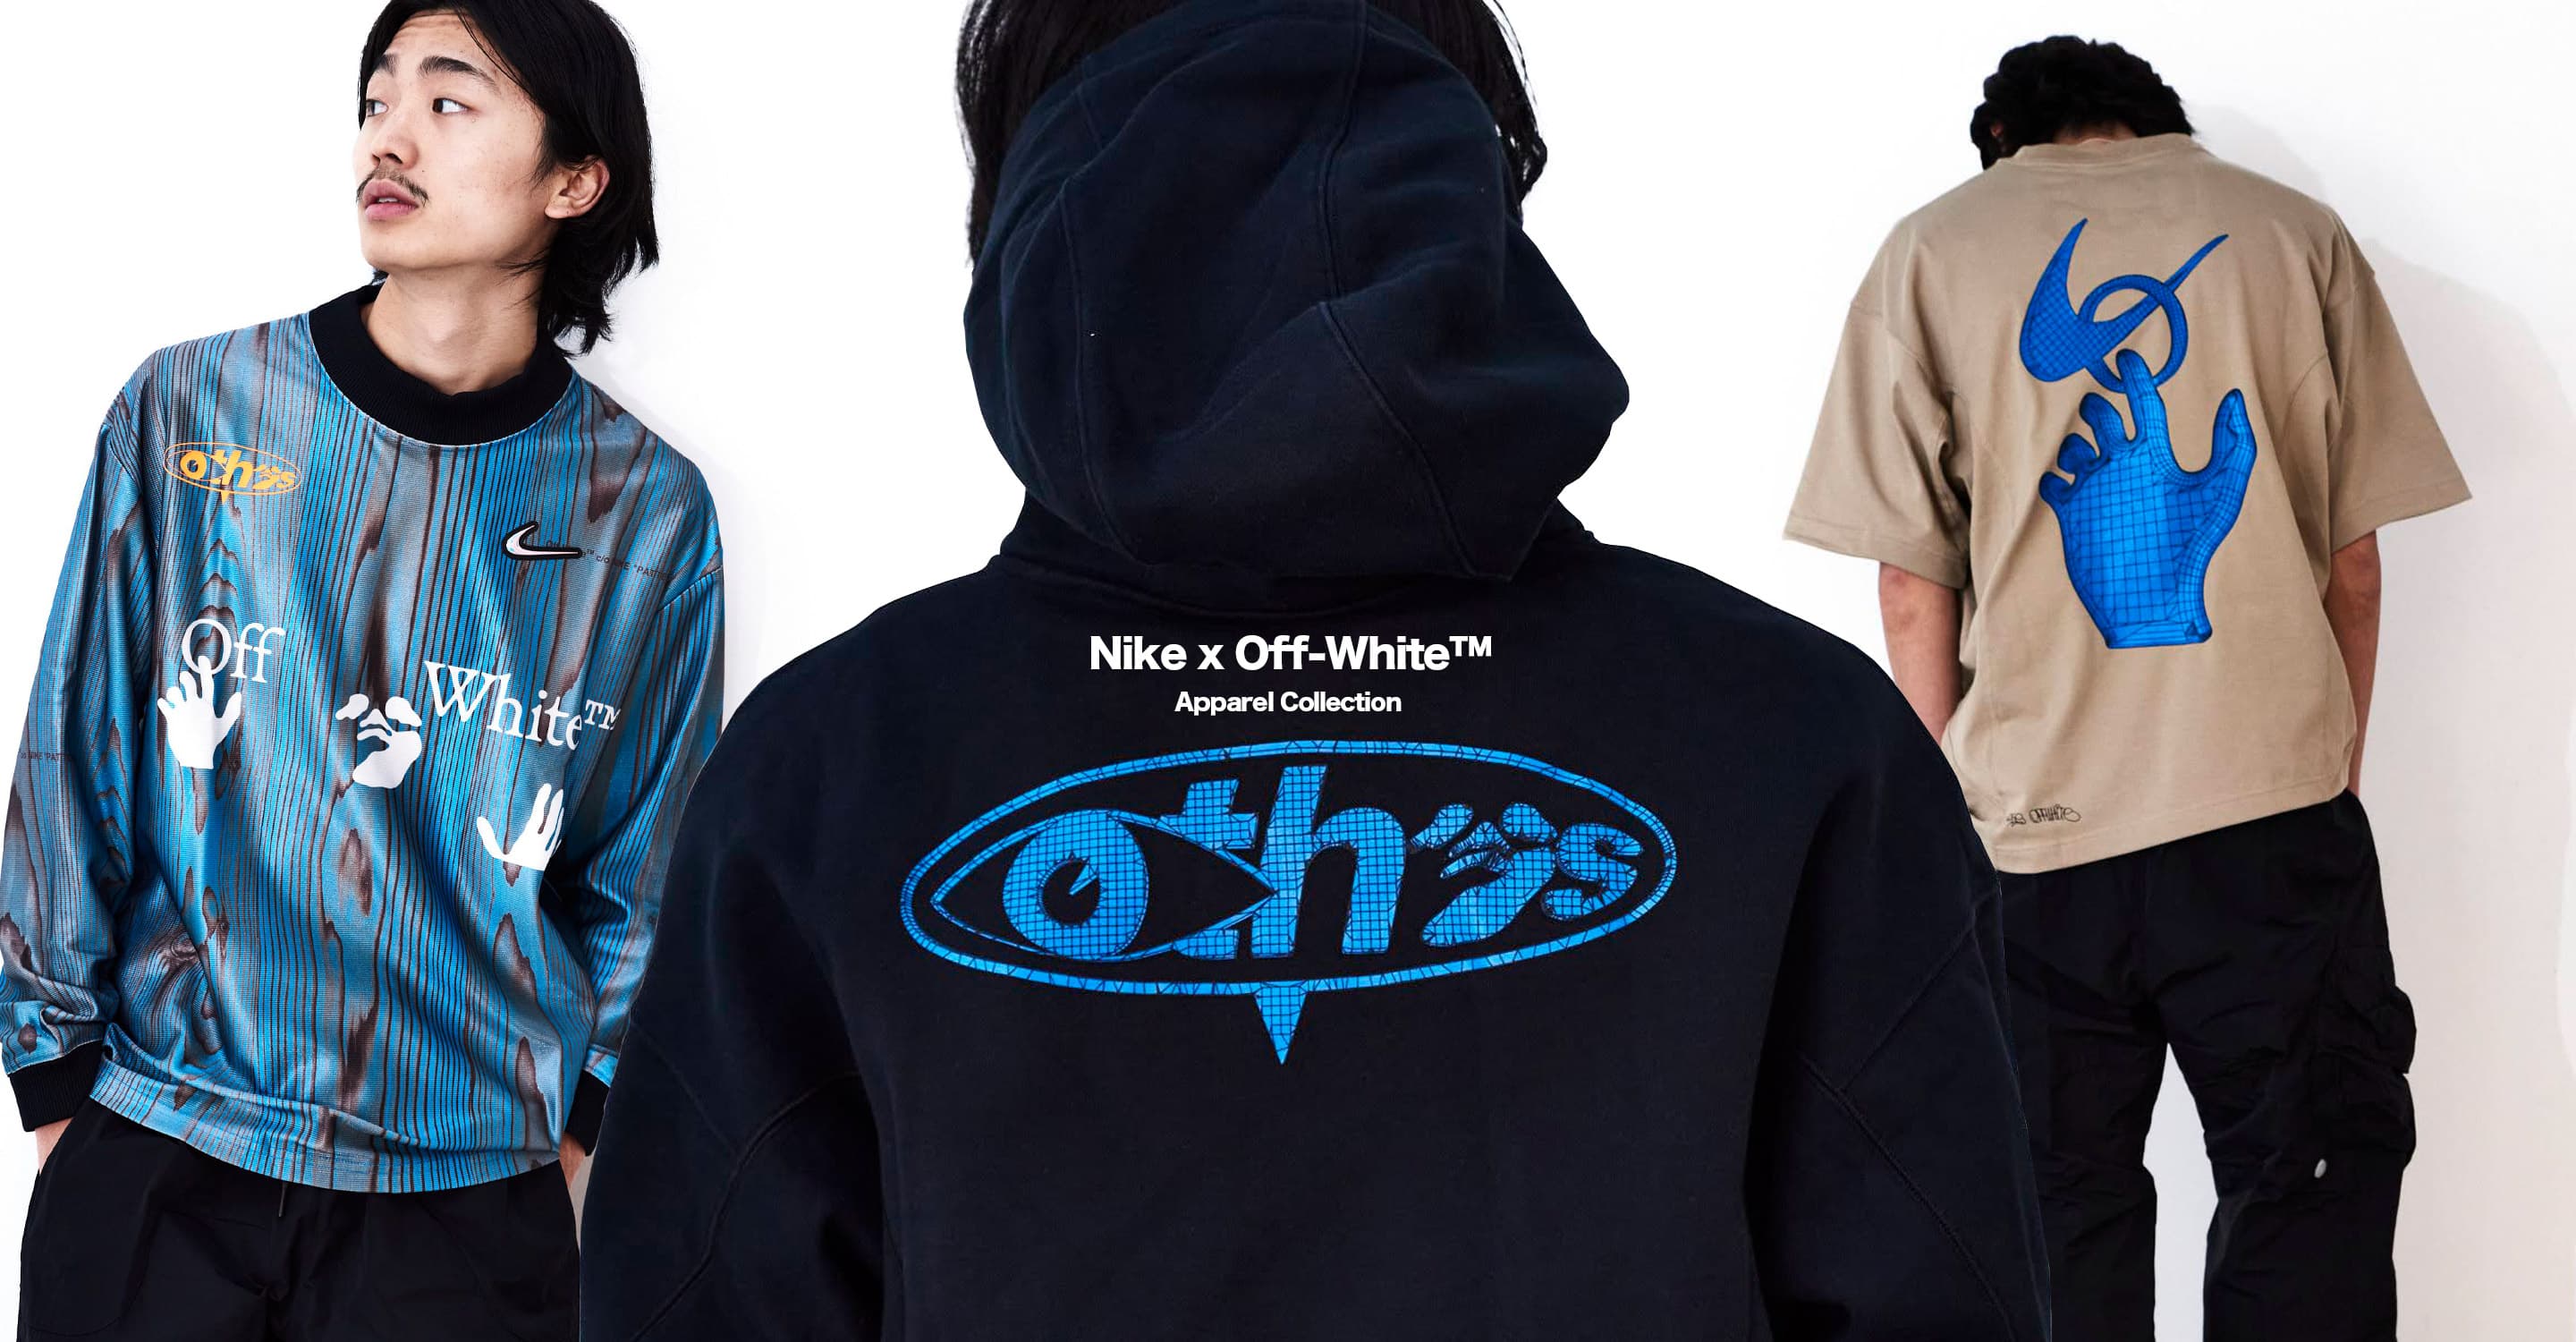 "Nike x Off-White™ APPAREL COLLECTION"